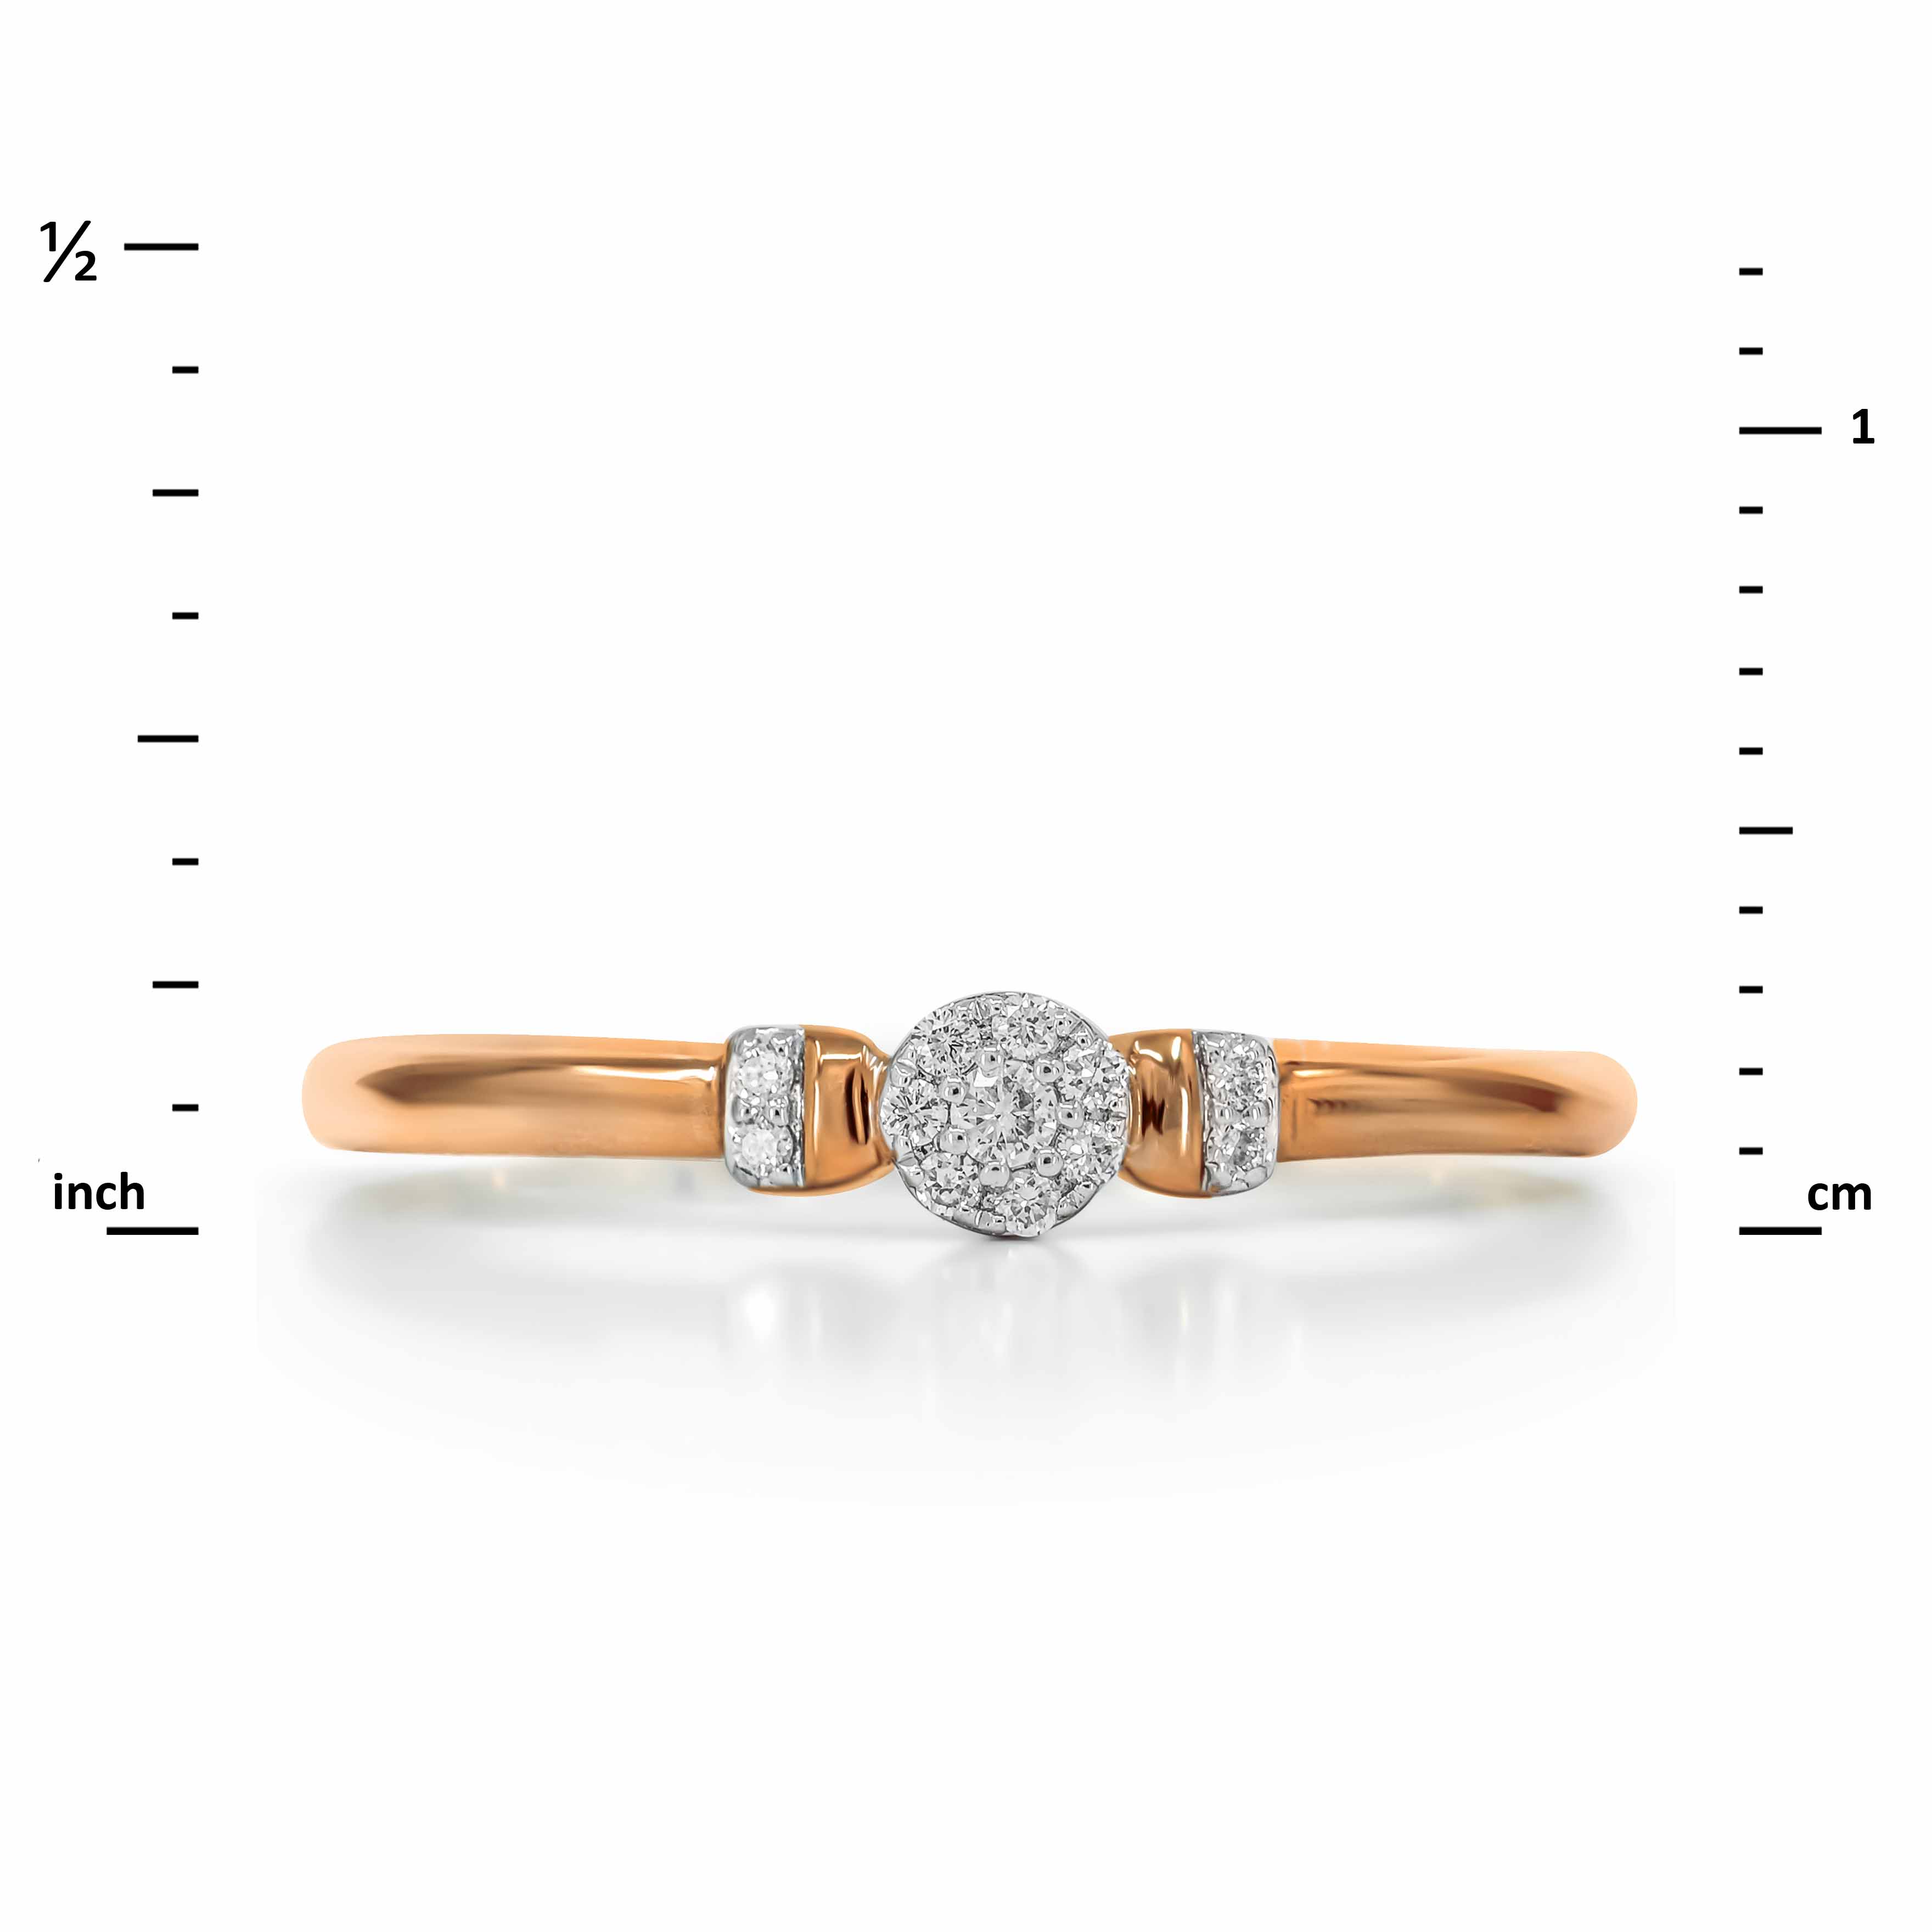 Diamond Ring. Hypoallergenic 585 Rose Gold, Rhodium Detailing. Ring with Diamond Cluster and Two Diamond Spacers